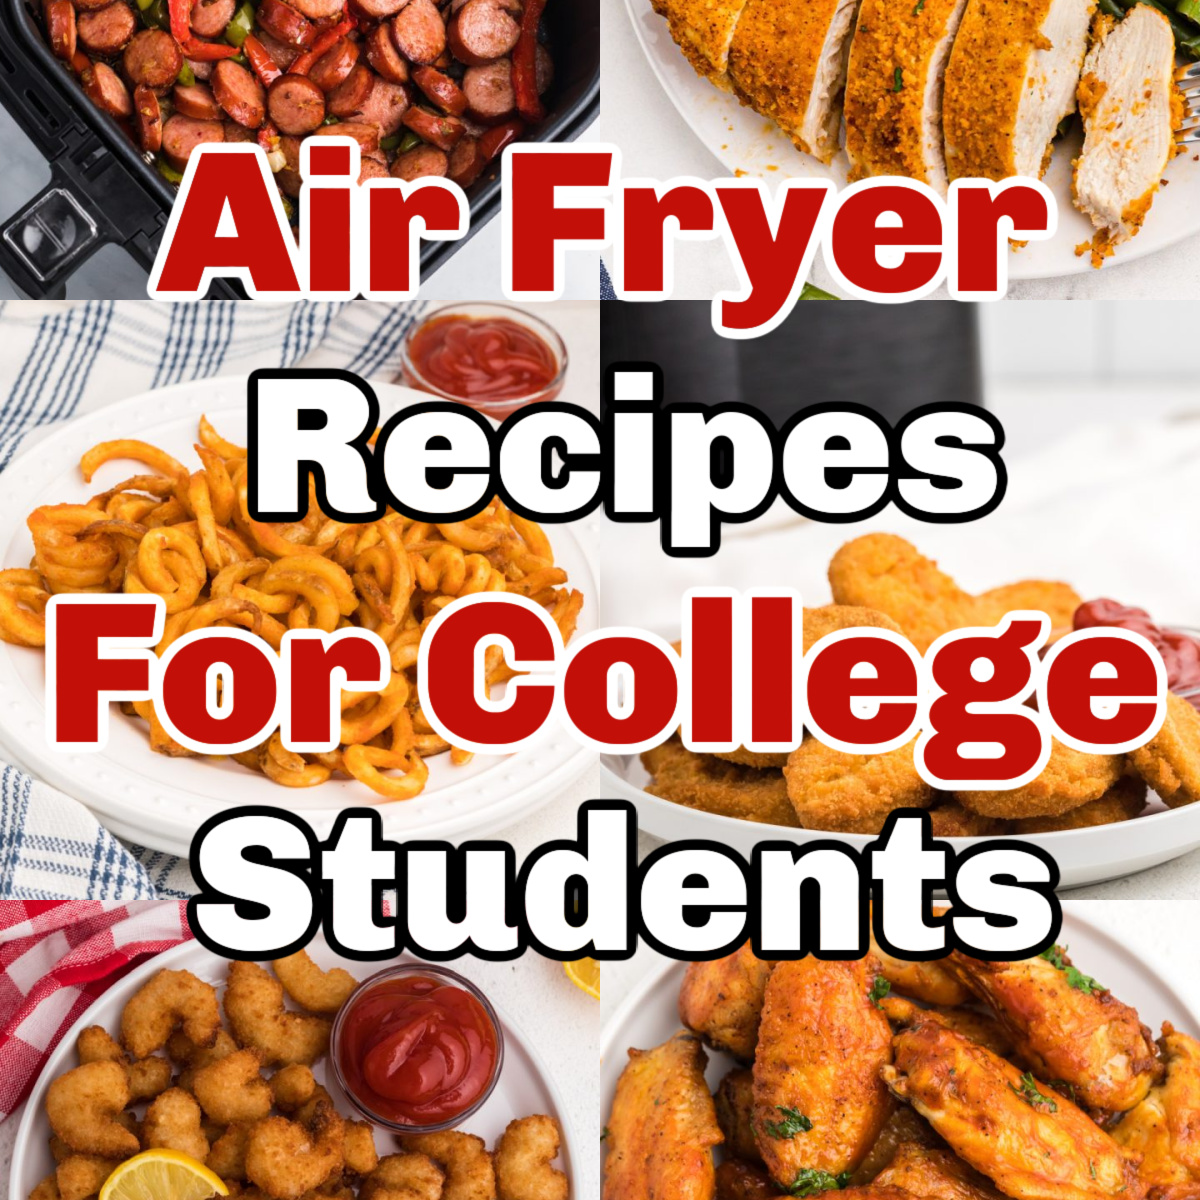 https://airfryingfoodie.com/wp-content/uploads/2022/07/Air-Fryer-Recipes-for-College-Students-copy.jpeg